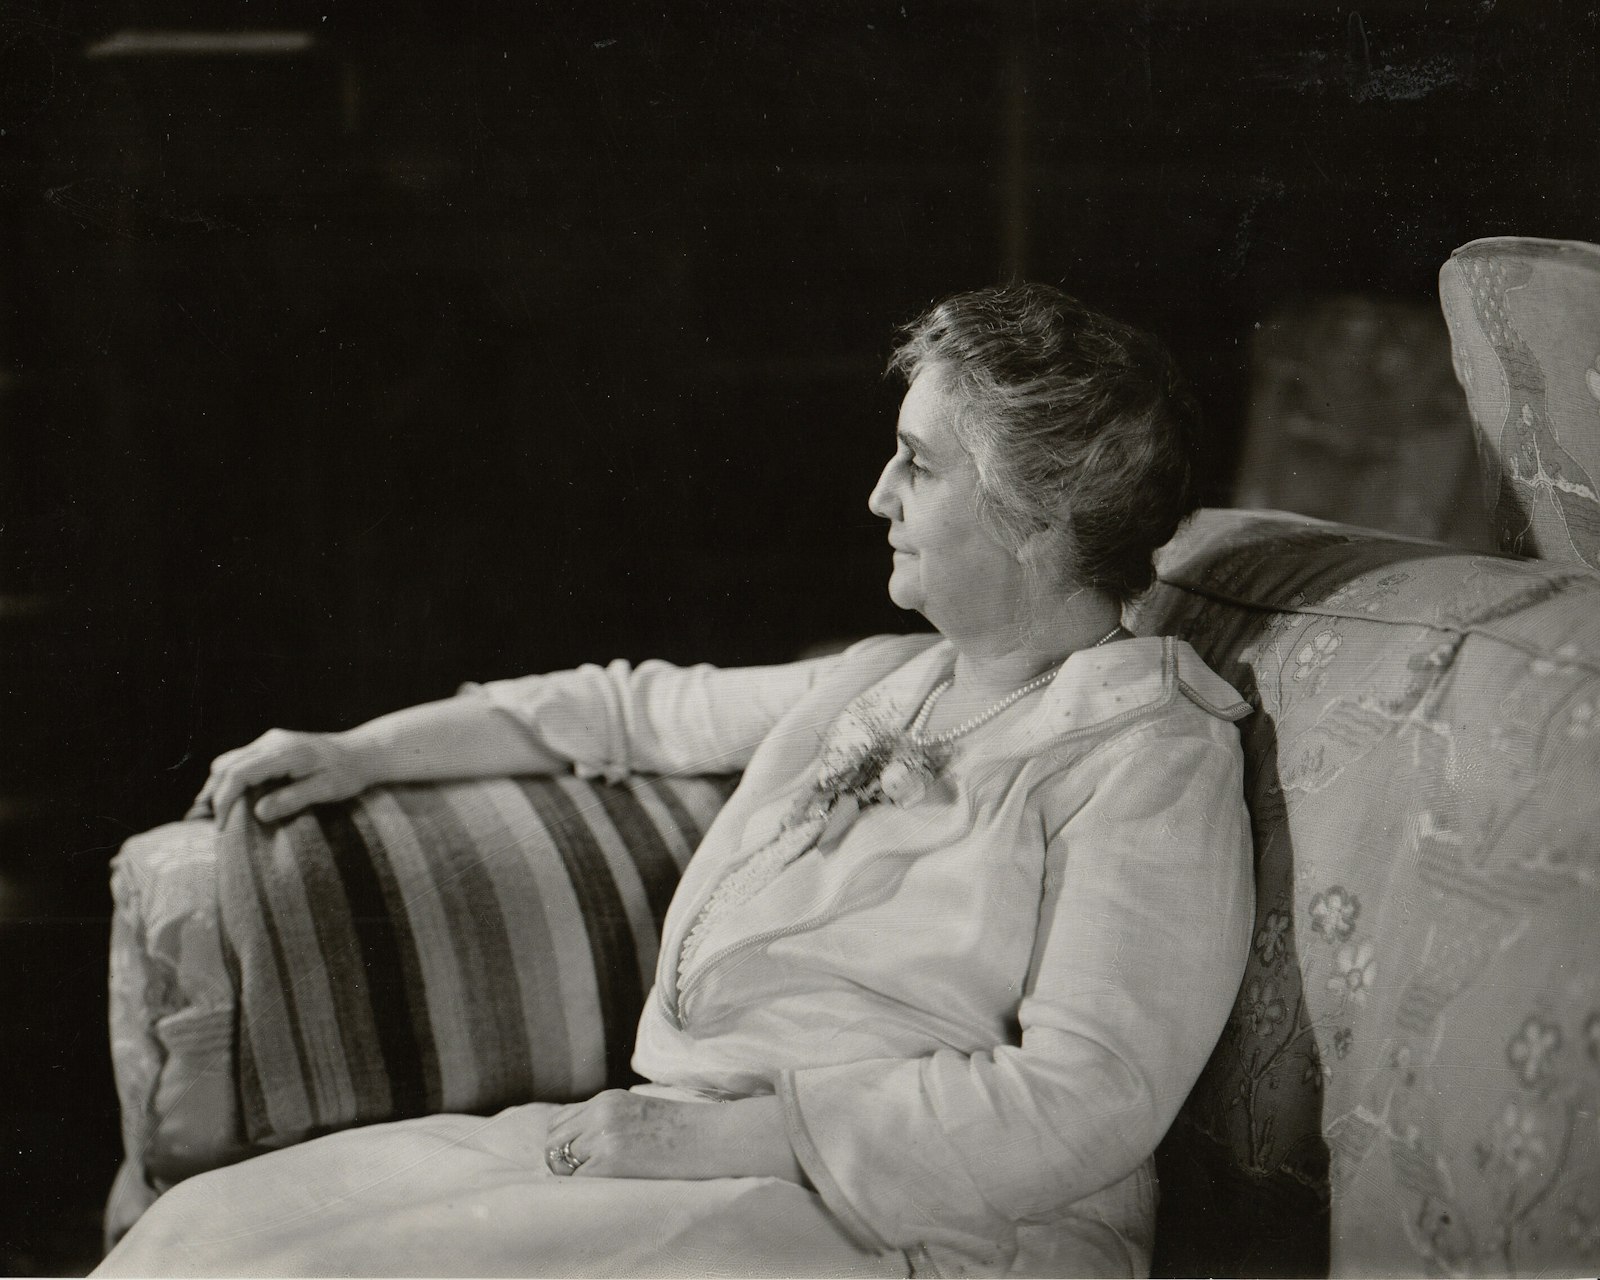 A profile photo of a woman seated on a couch.